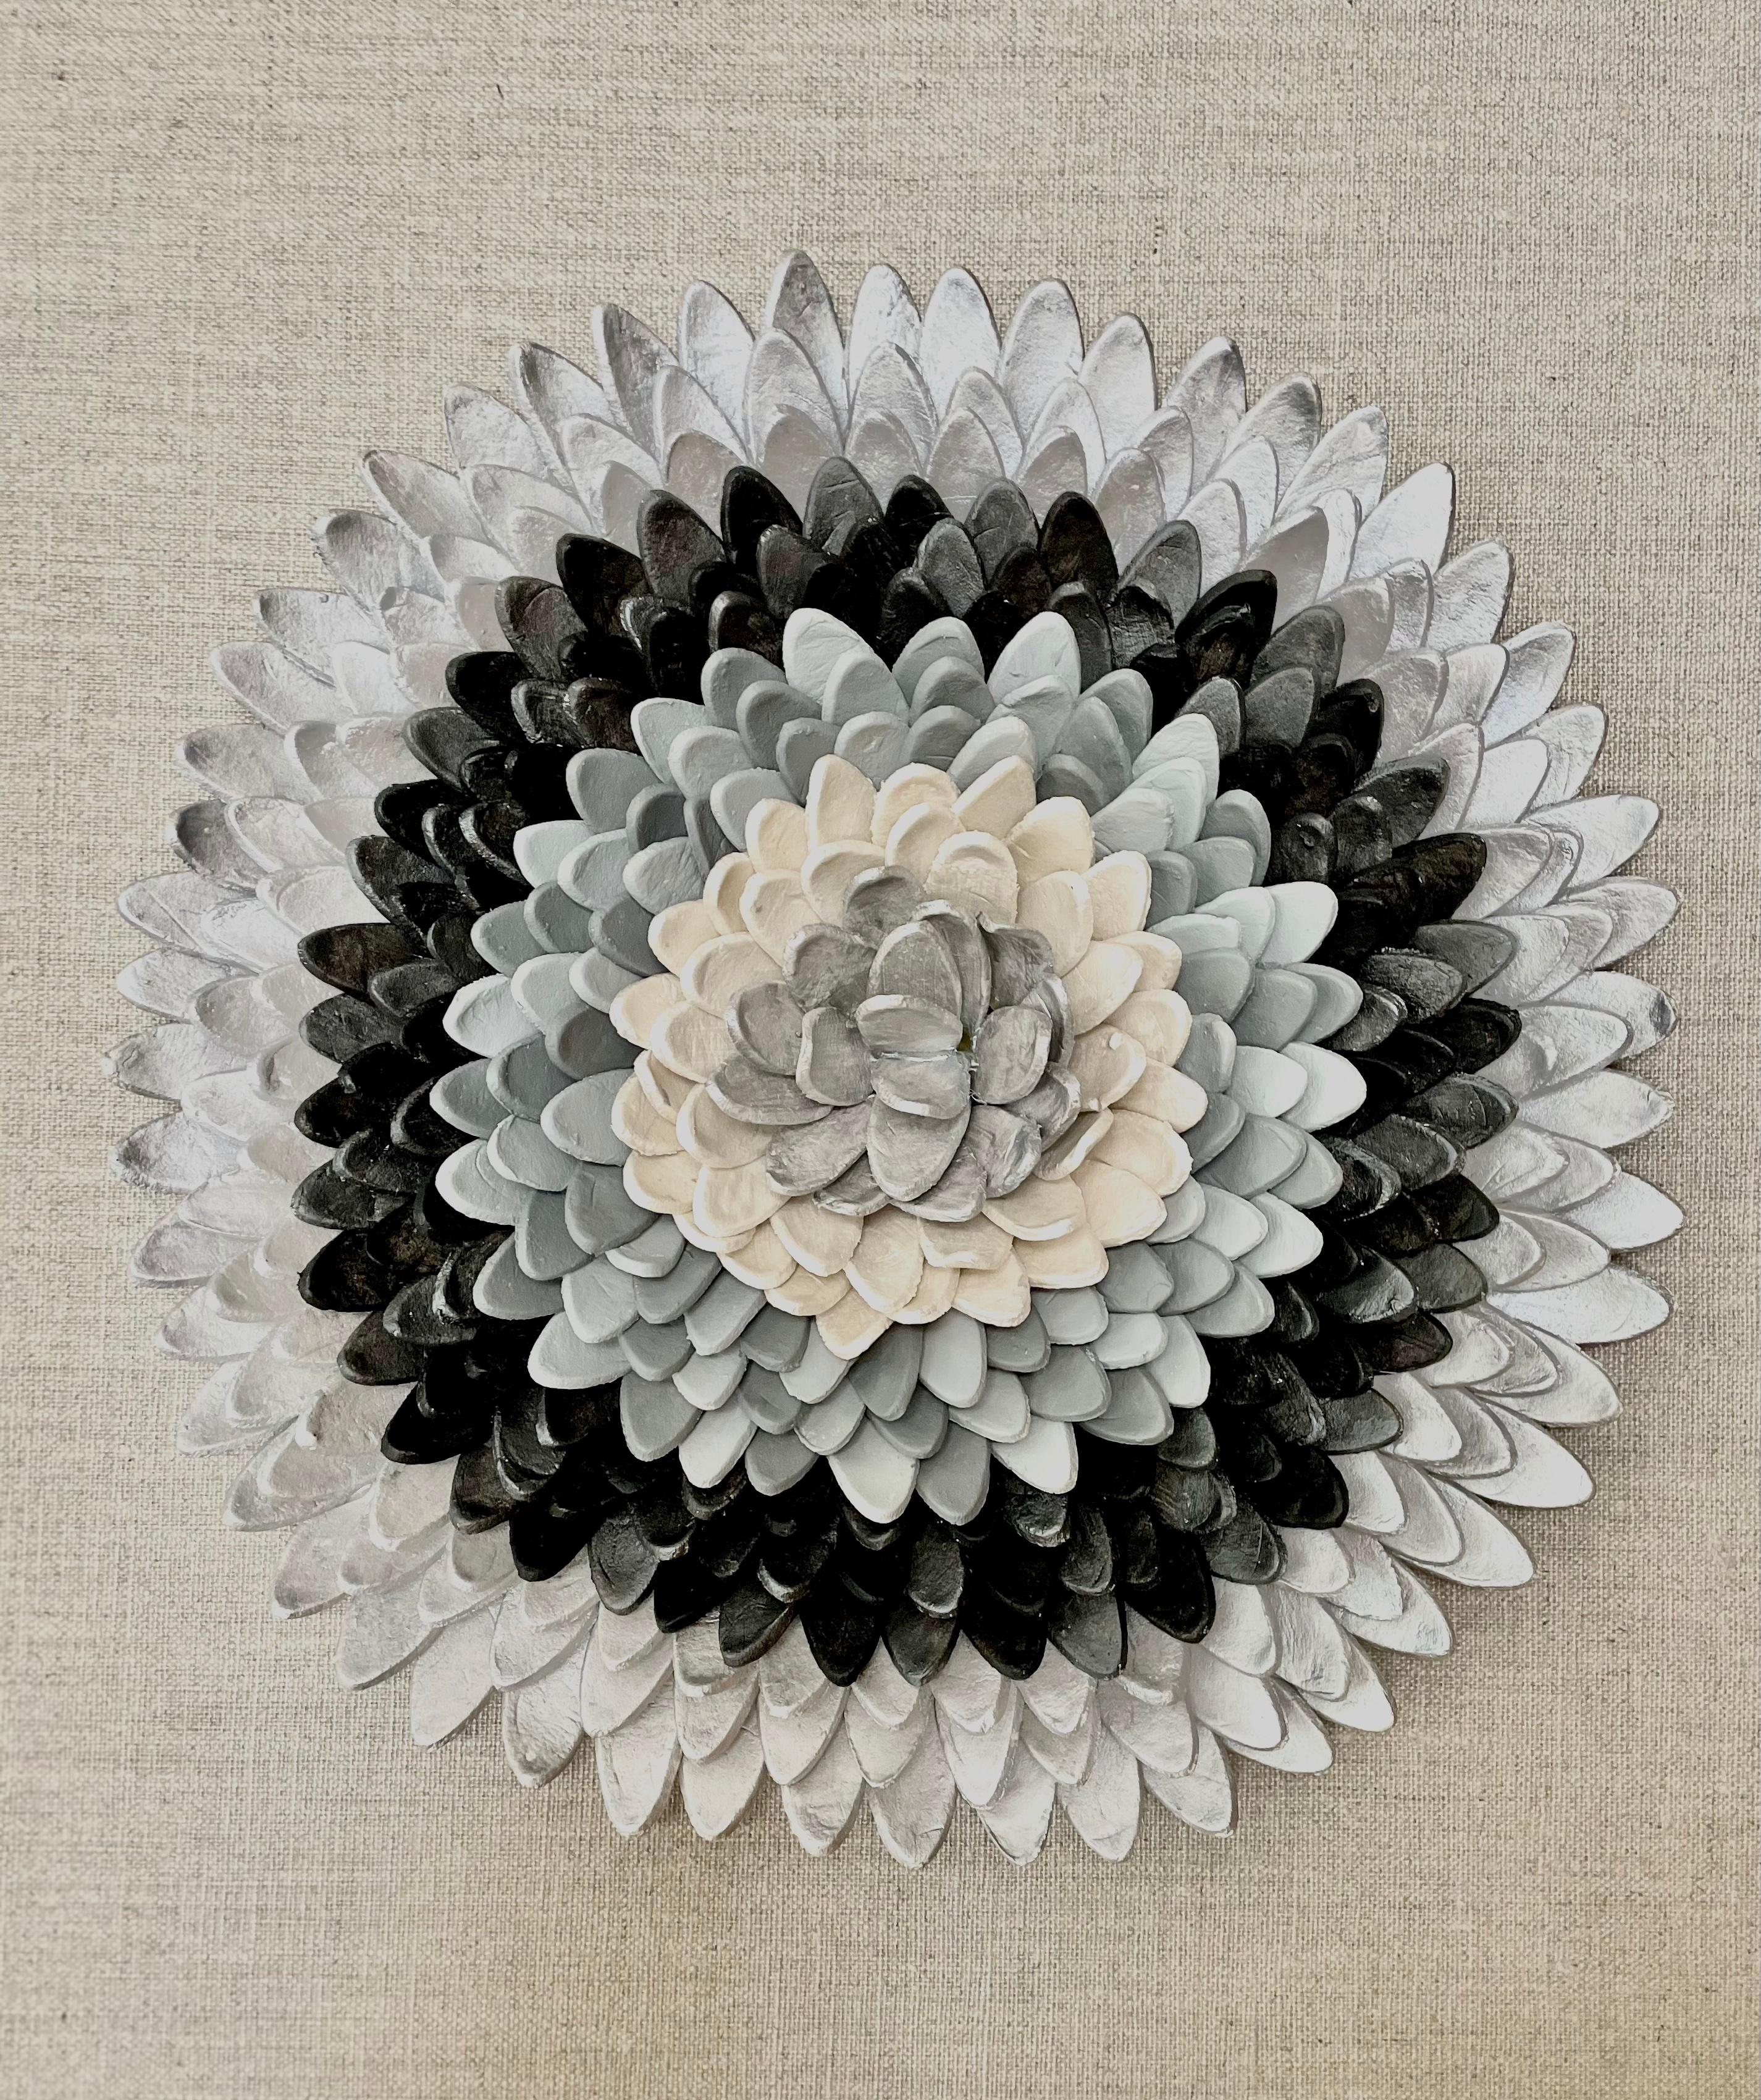 Flos 1- 3D nature inspired floral grey silver clay composition in plexiglass box